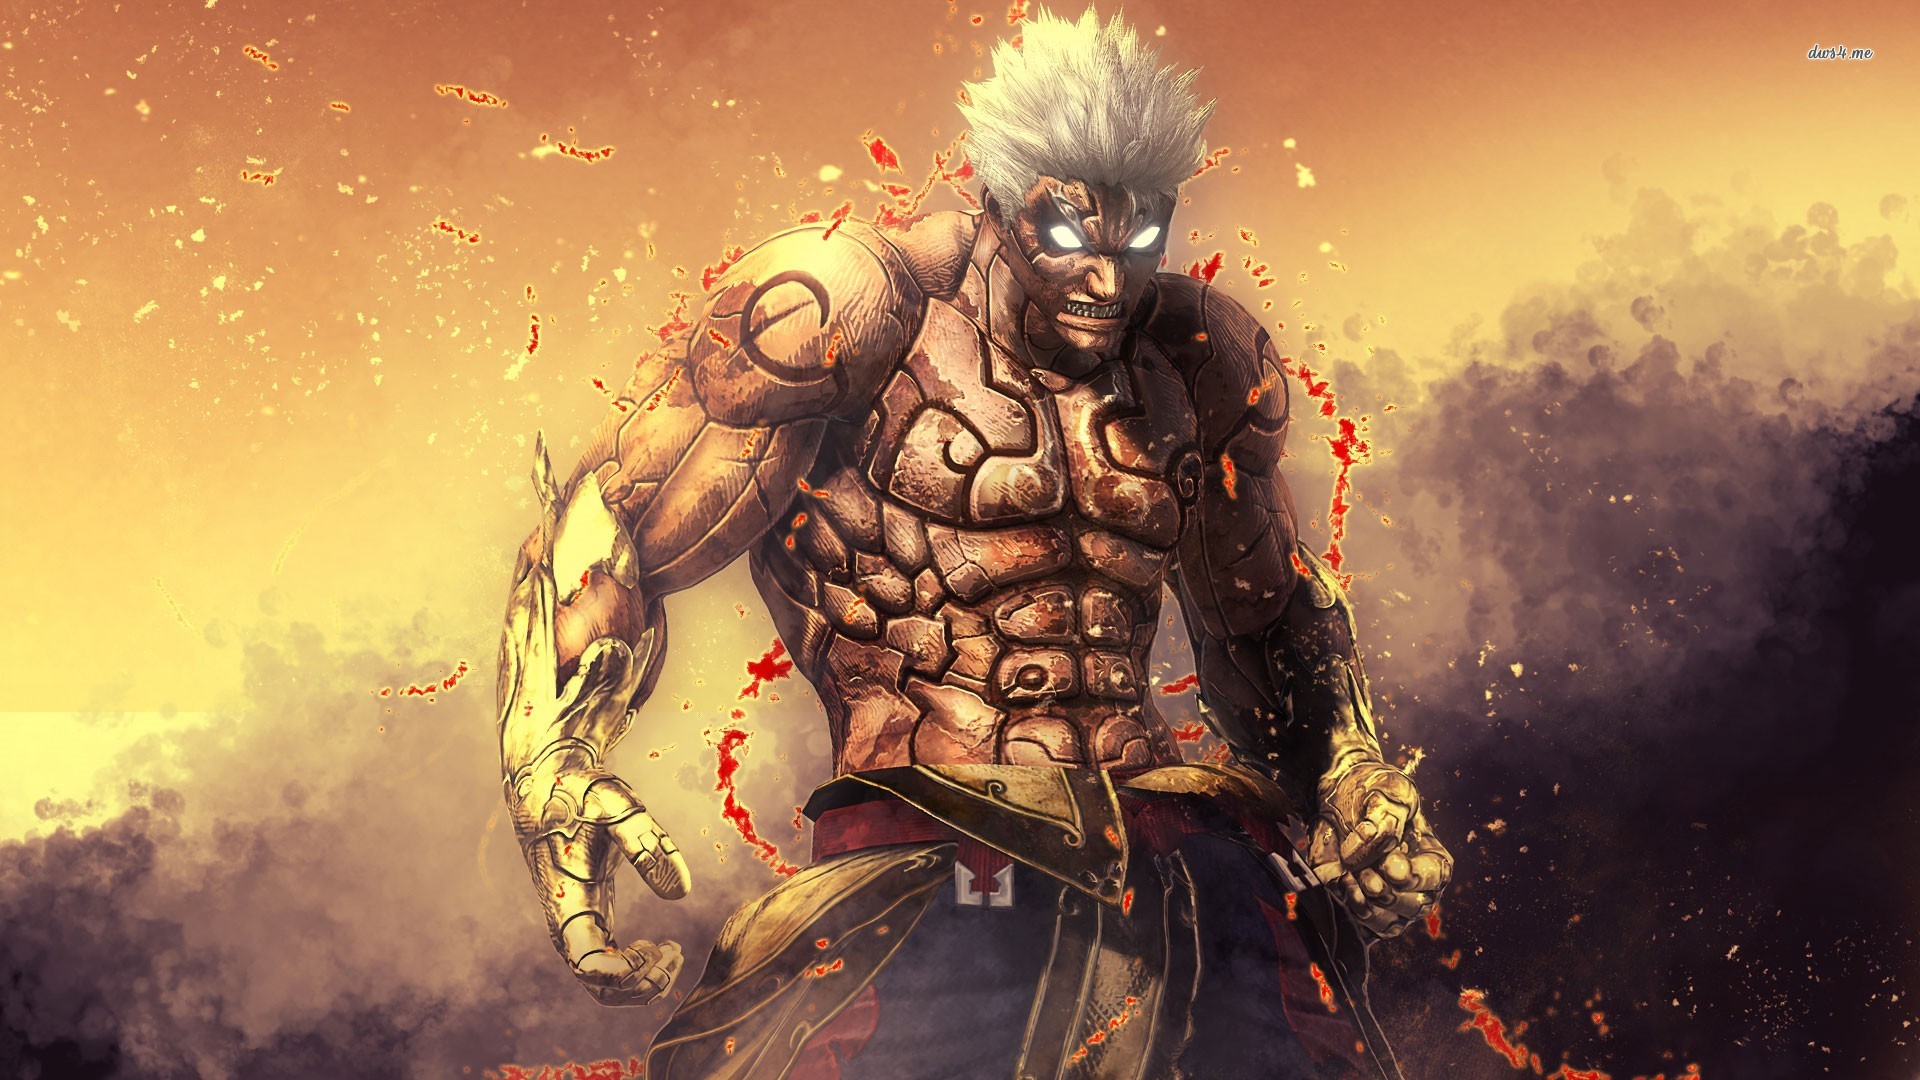 Images of Asura's Wrath | 1920x1080